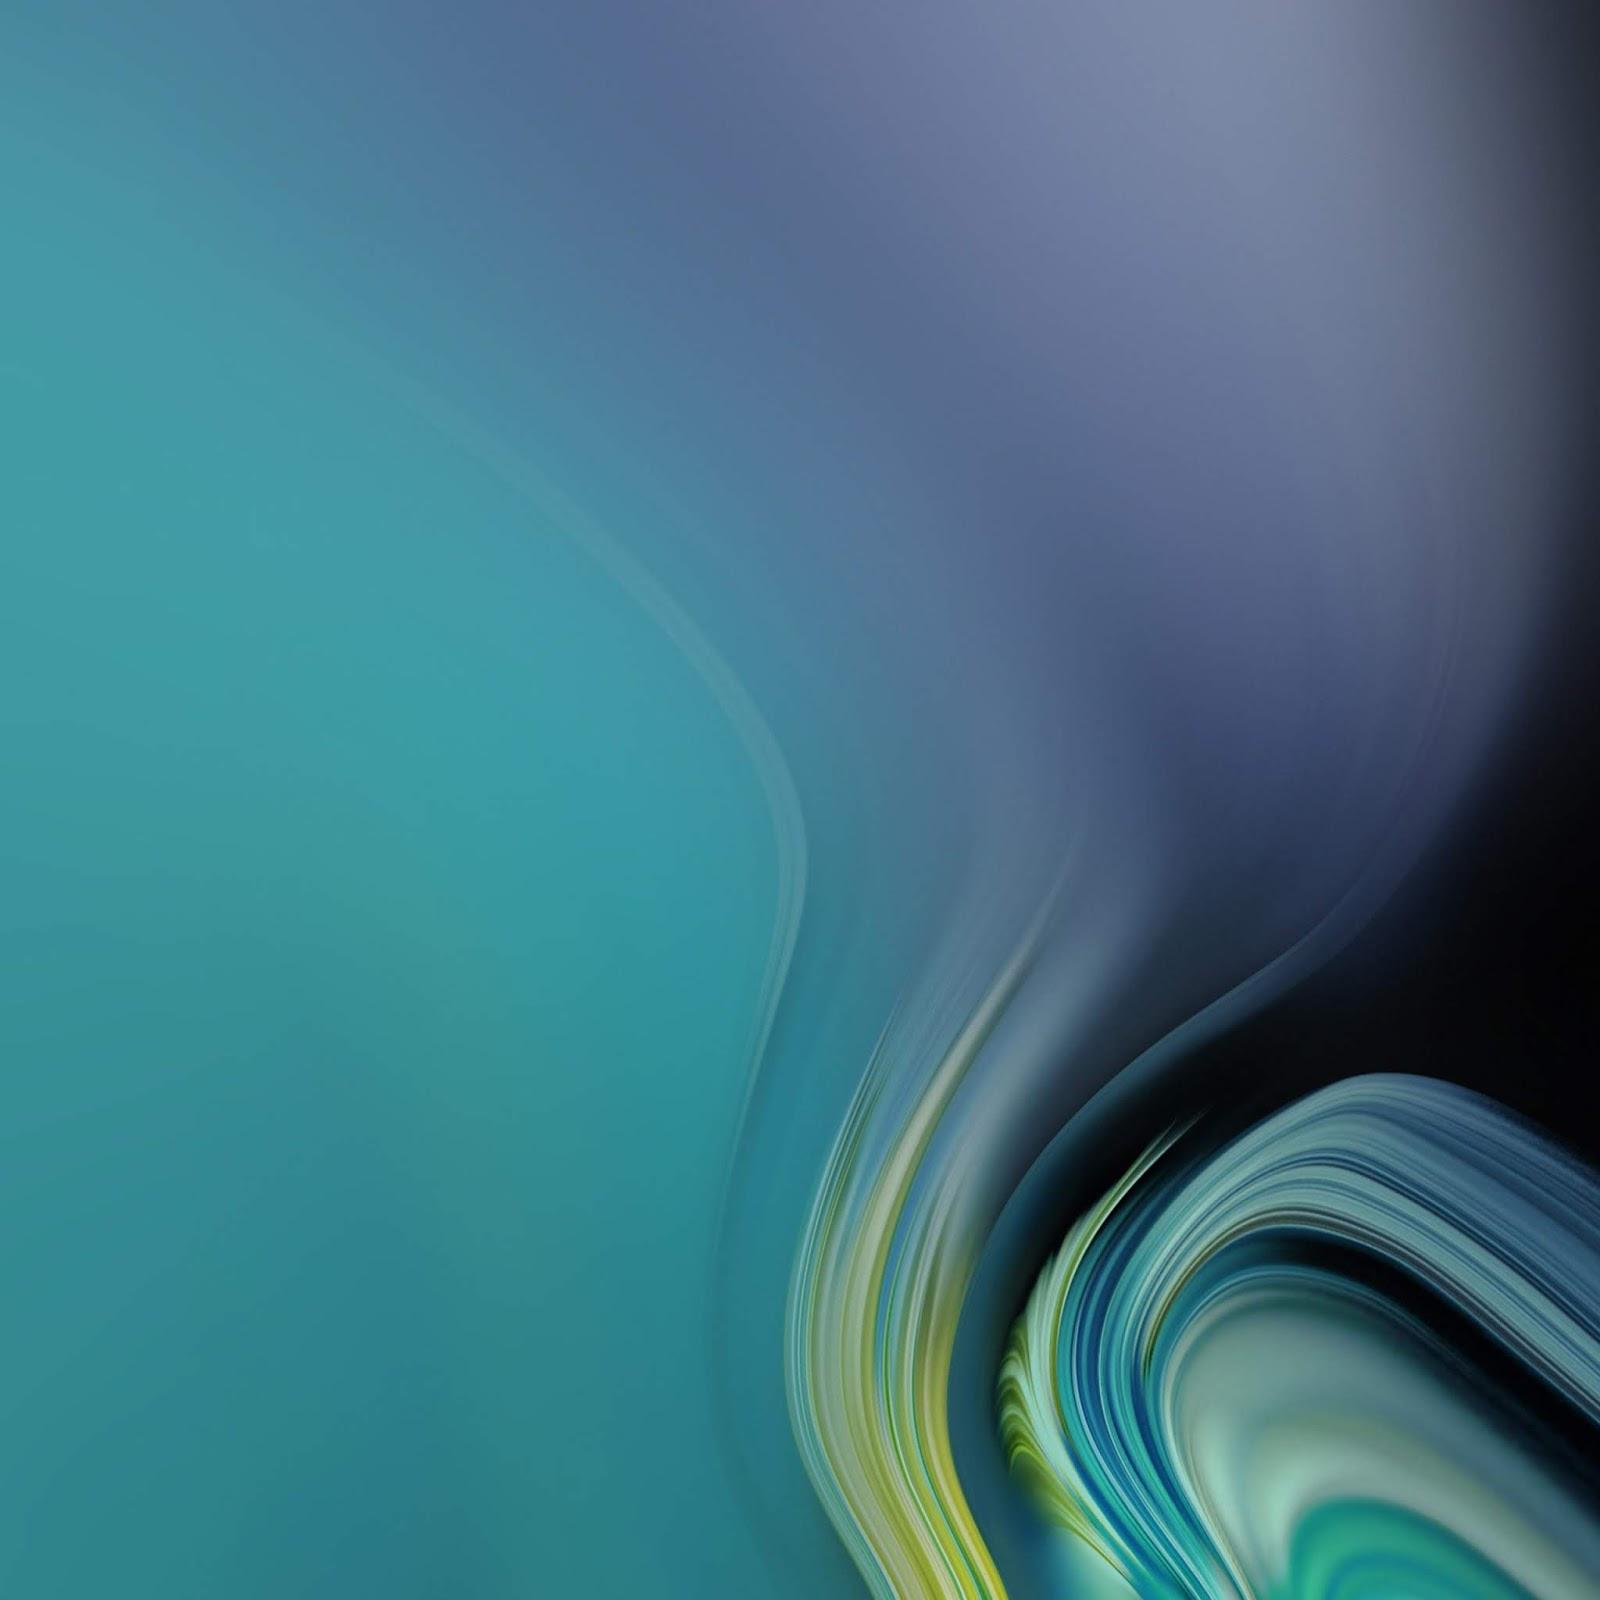 Galaxy note january wallpapers